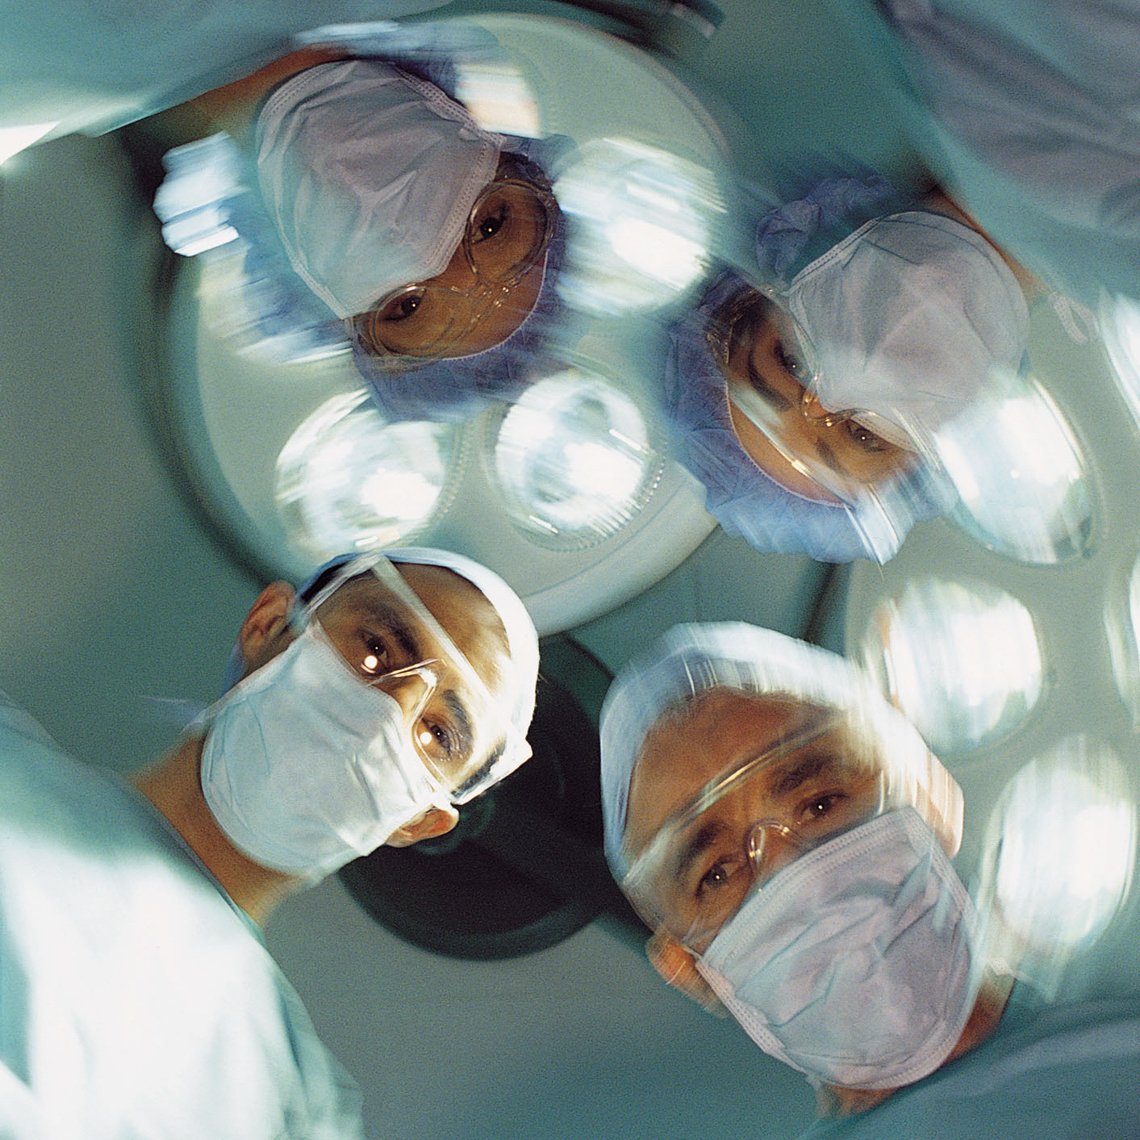 view of surgeon faces from patient on table